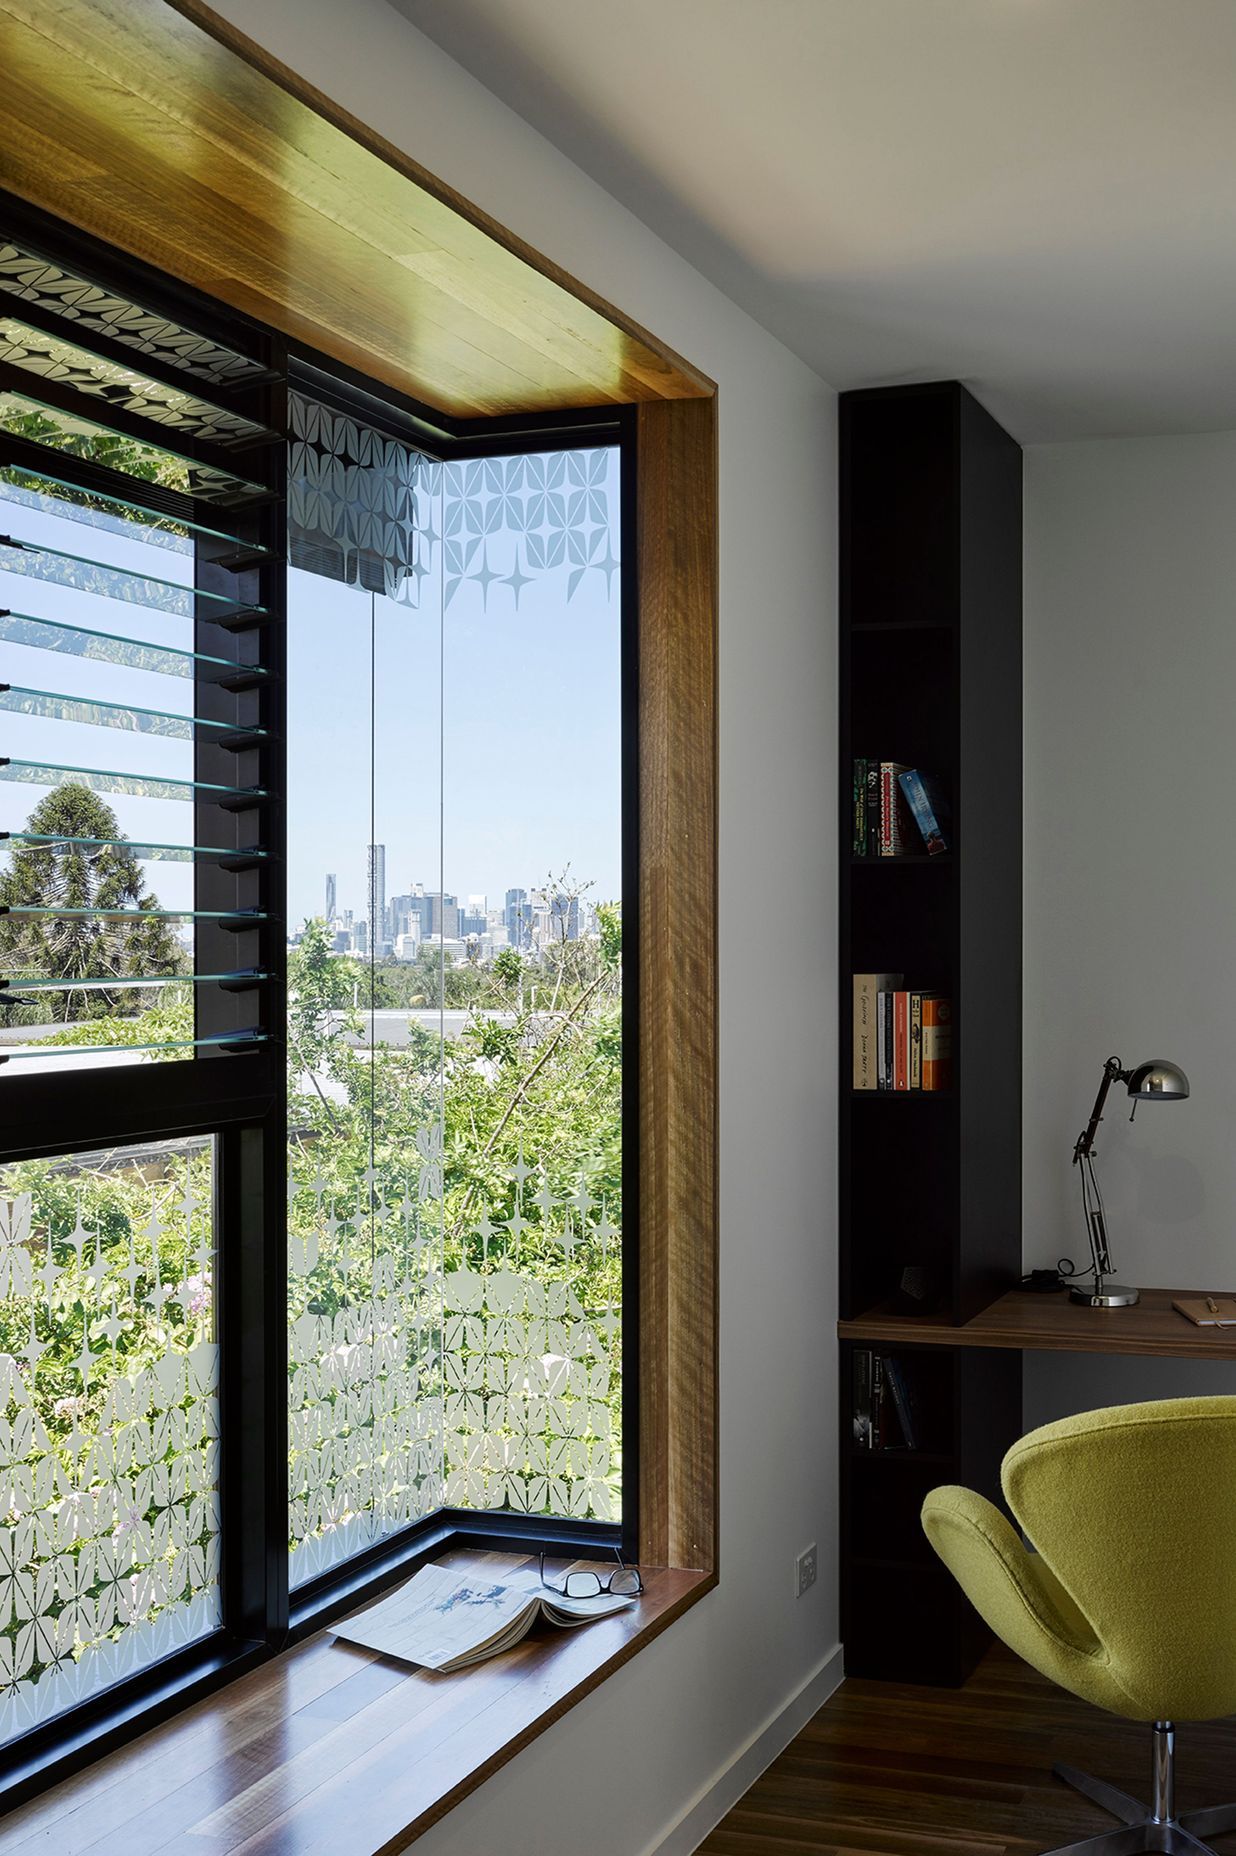 Photography: Christopher Frederick Jones, Roger D’Souza and Cathy Schusler | Bay windows have been designed to take maximum advantage of the city views while offering protection from the sun through automatically controlled venetian blinds.